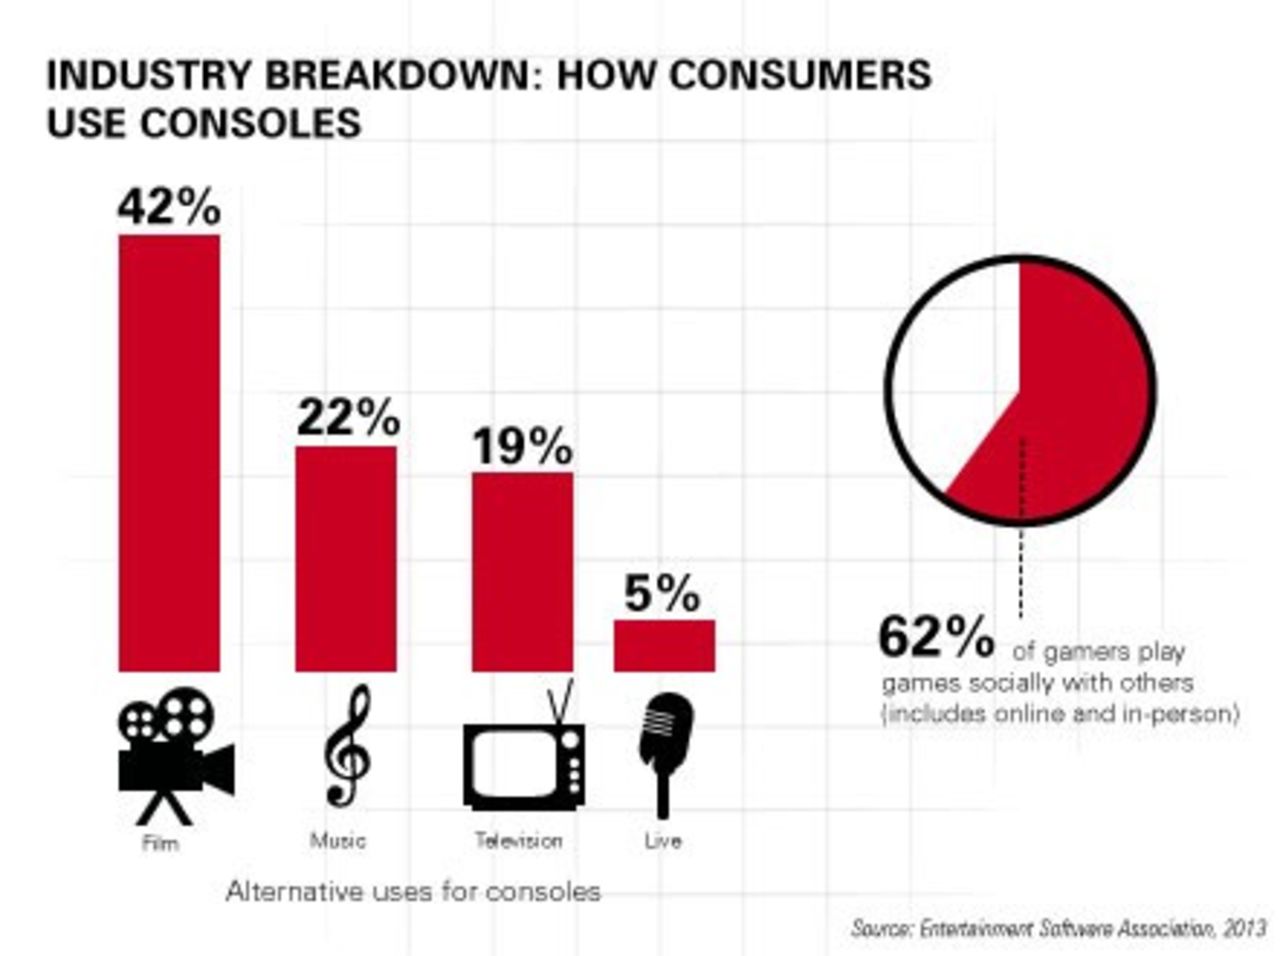 Data for the U.S. market shows how gamers no longer use consoles solely for video games.